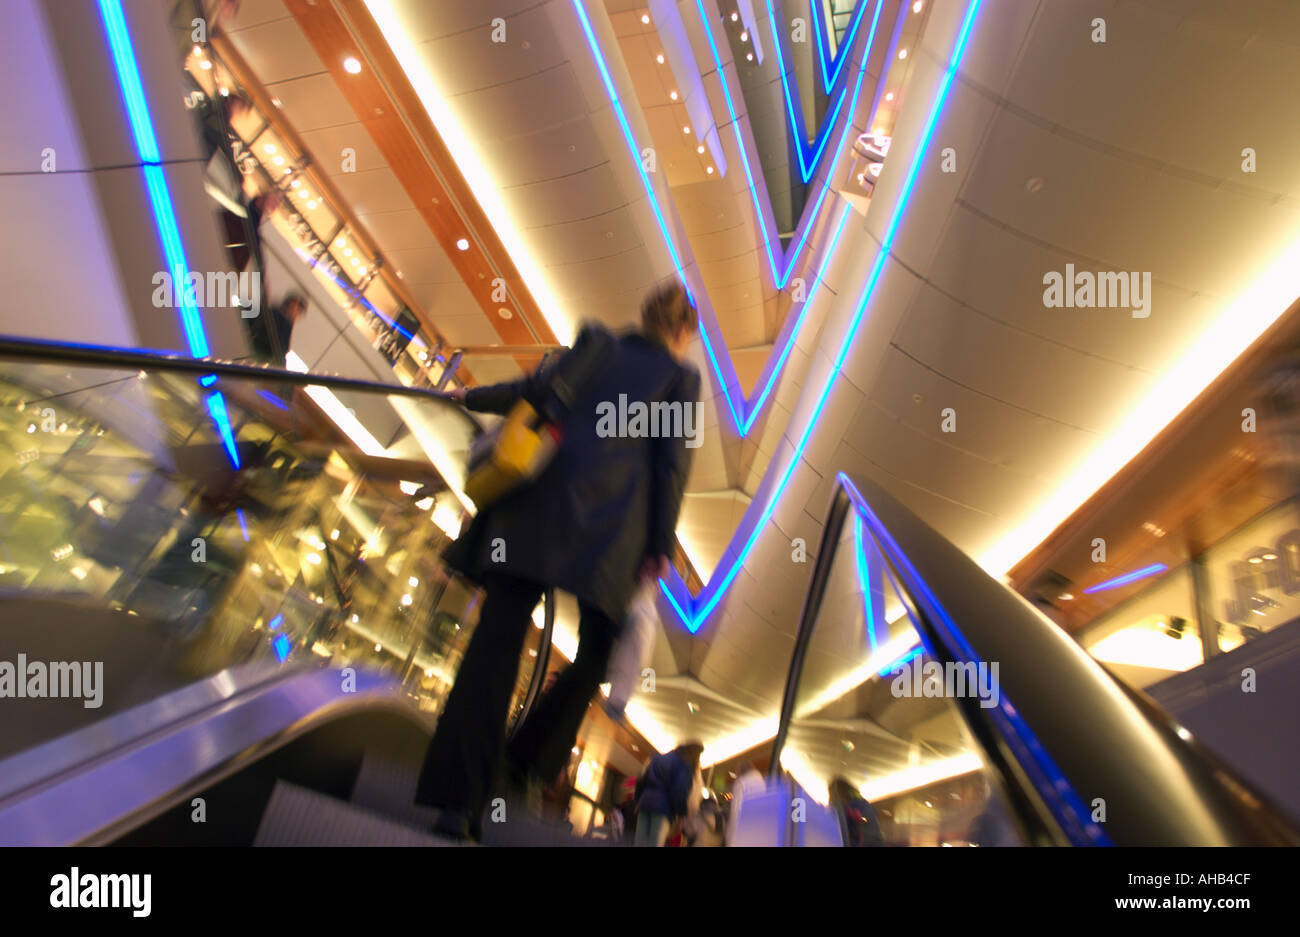 Shopping center Sevens at the shopping mile Koenigsallee in Duesseldorf Germany  Stock Photo